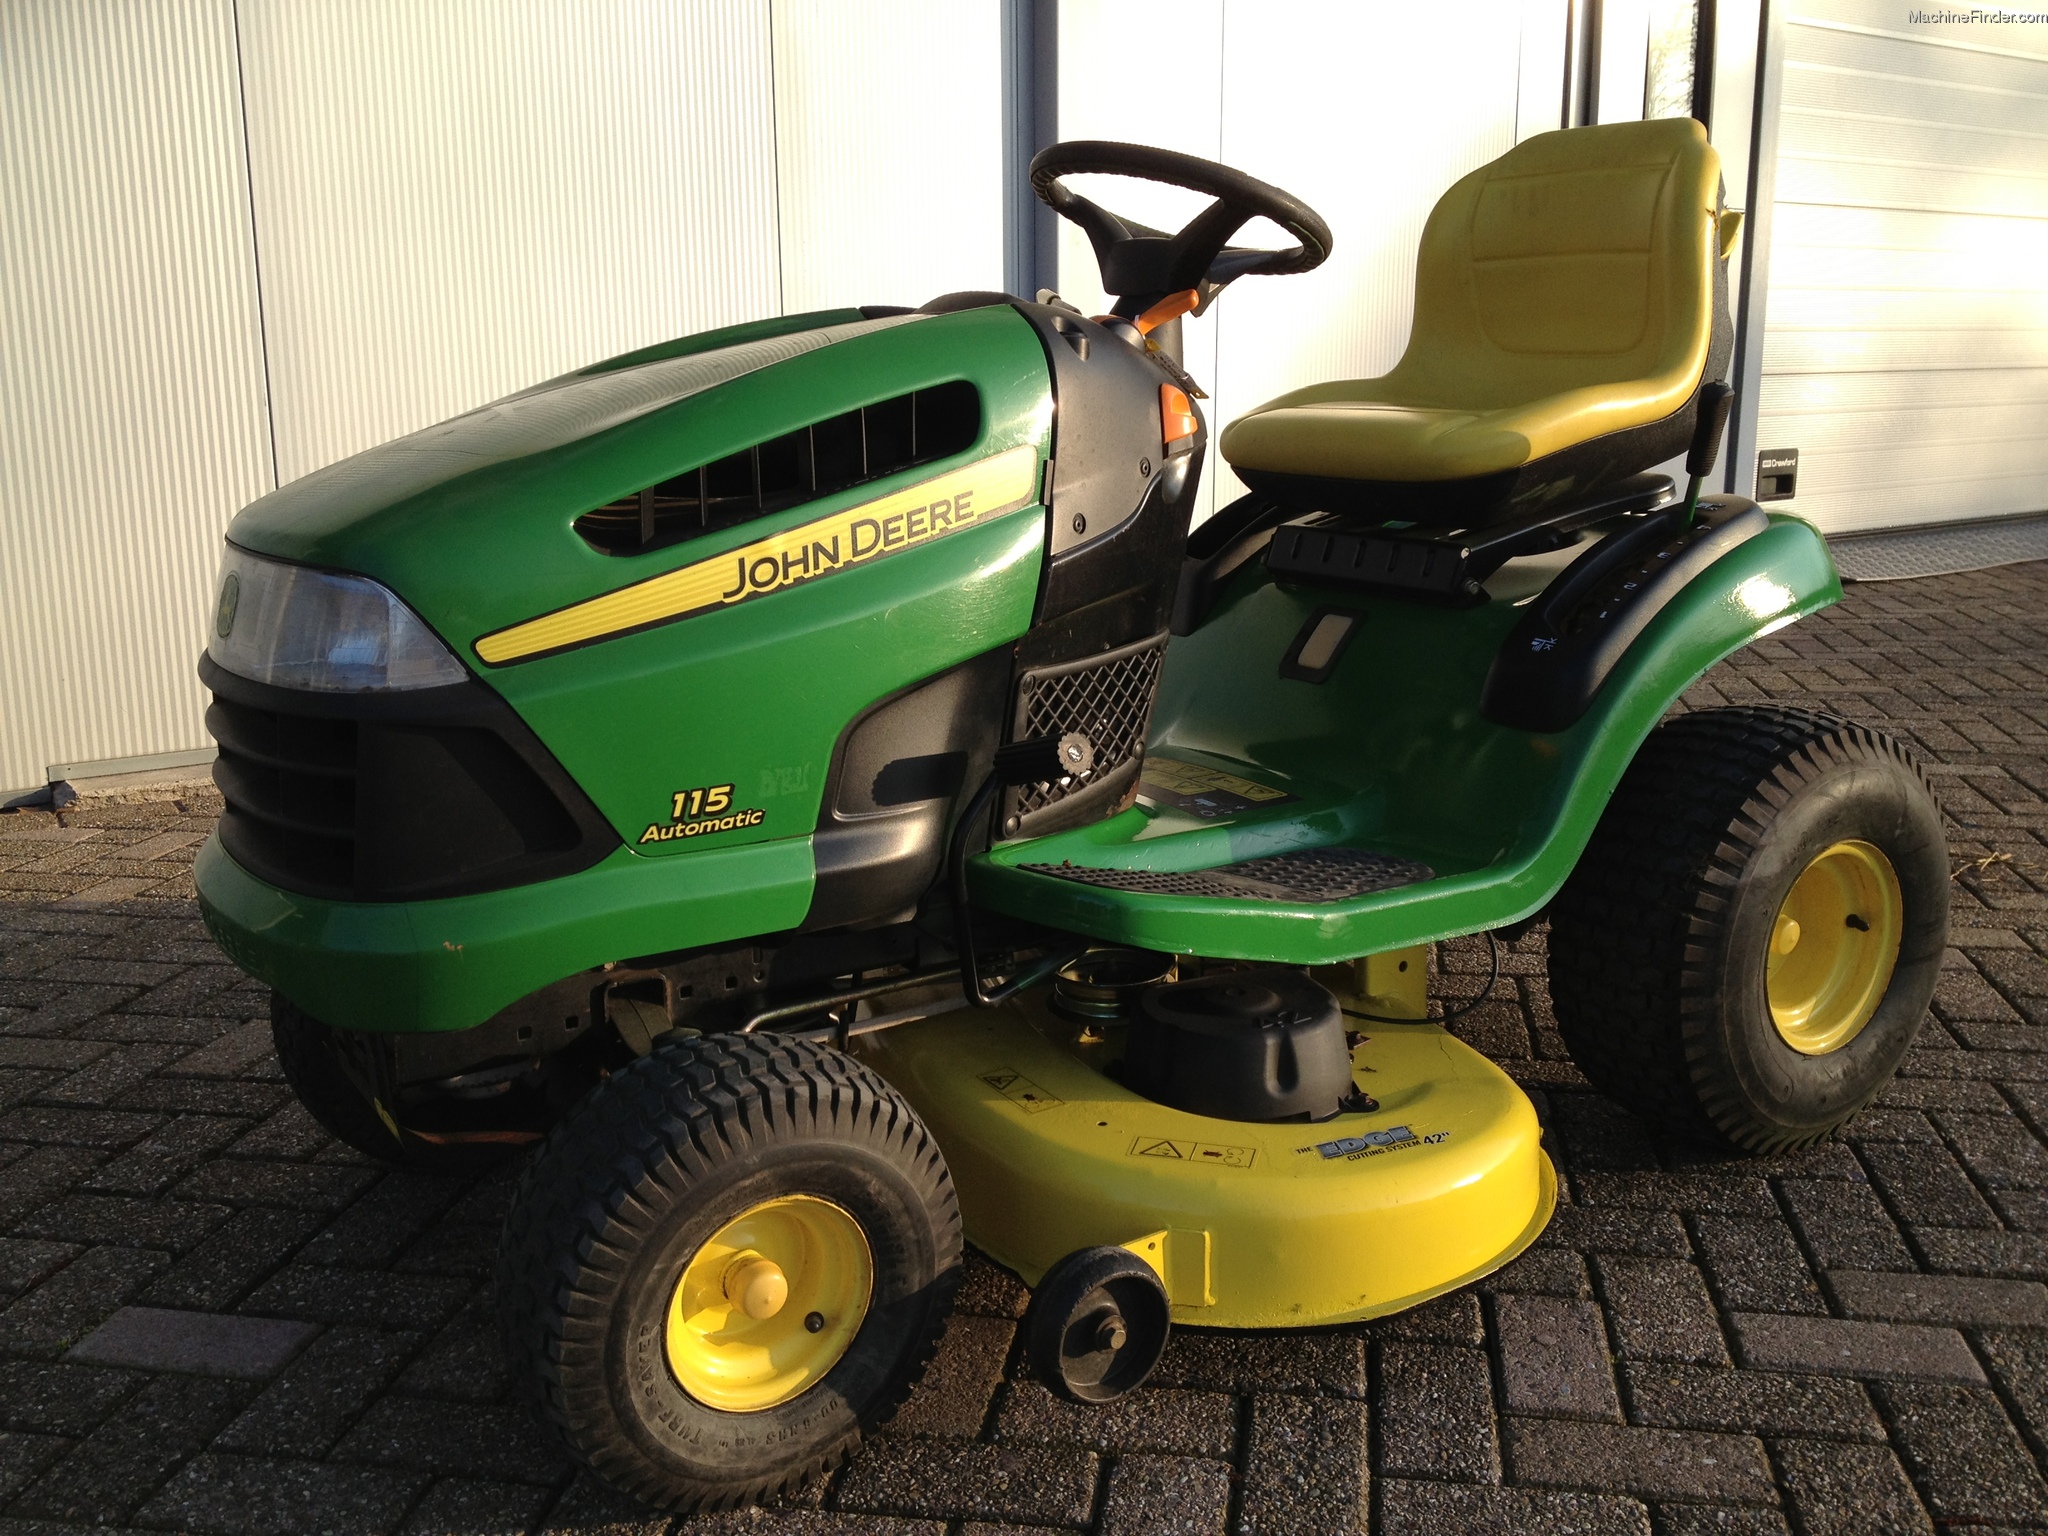 John Deere 115 Automatic Lawn & Garden and Commercial Mowing - John ...